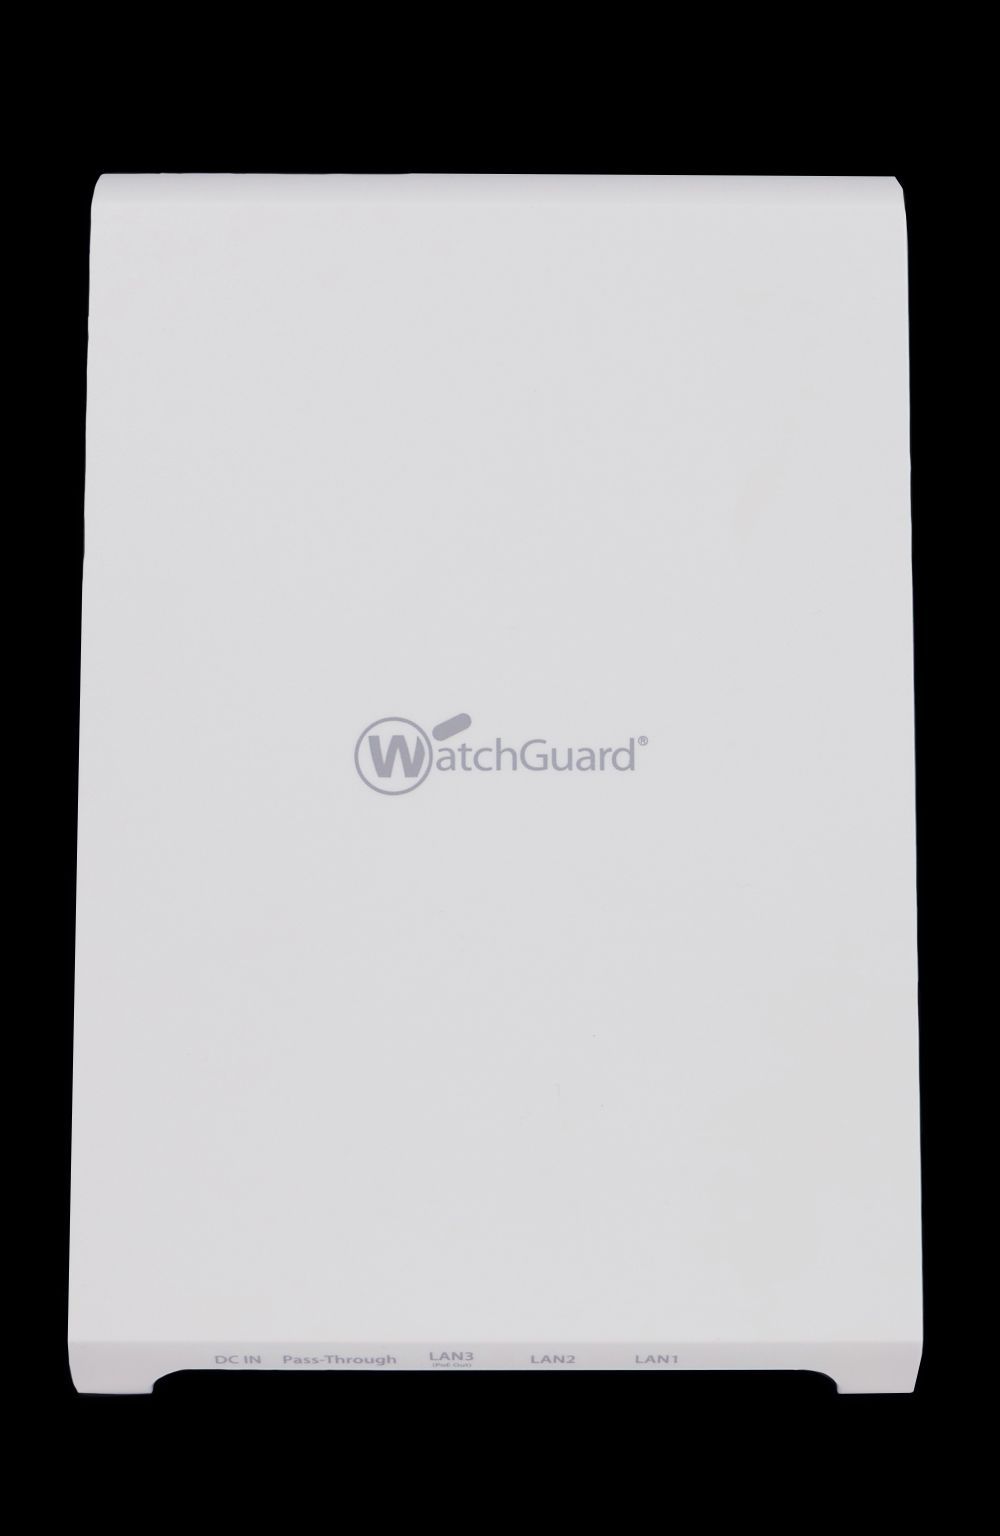 WatchGuard AP225W, Competitive Trade In to WatchGuard AP225W and 3-yr Secure Wi-Fi